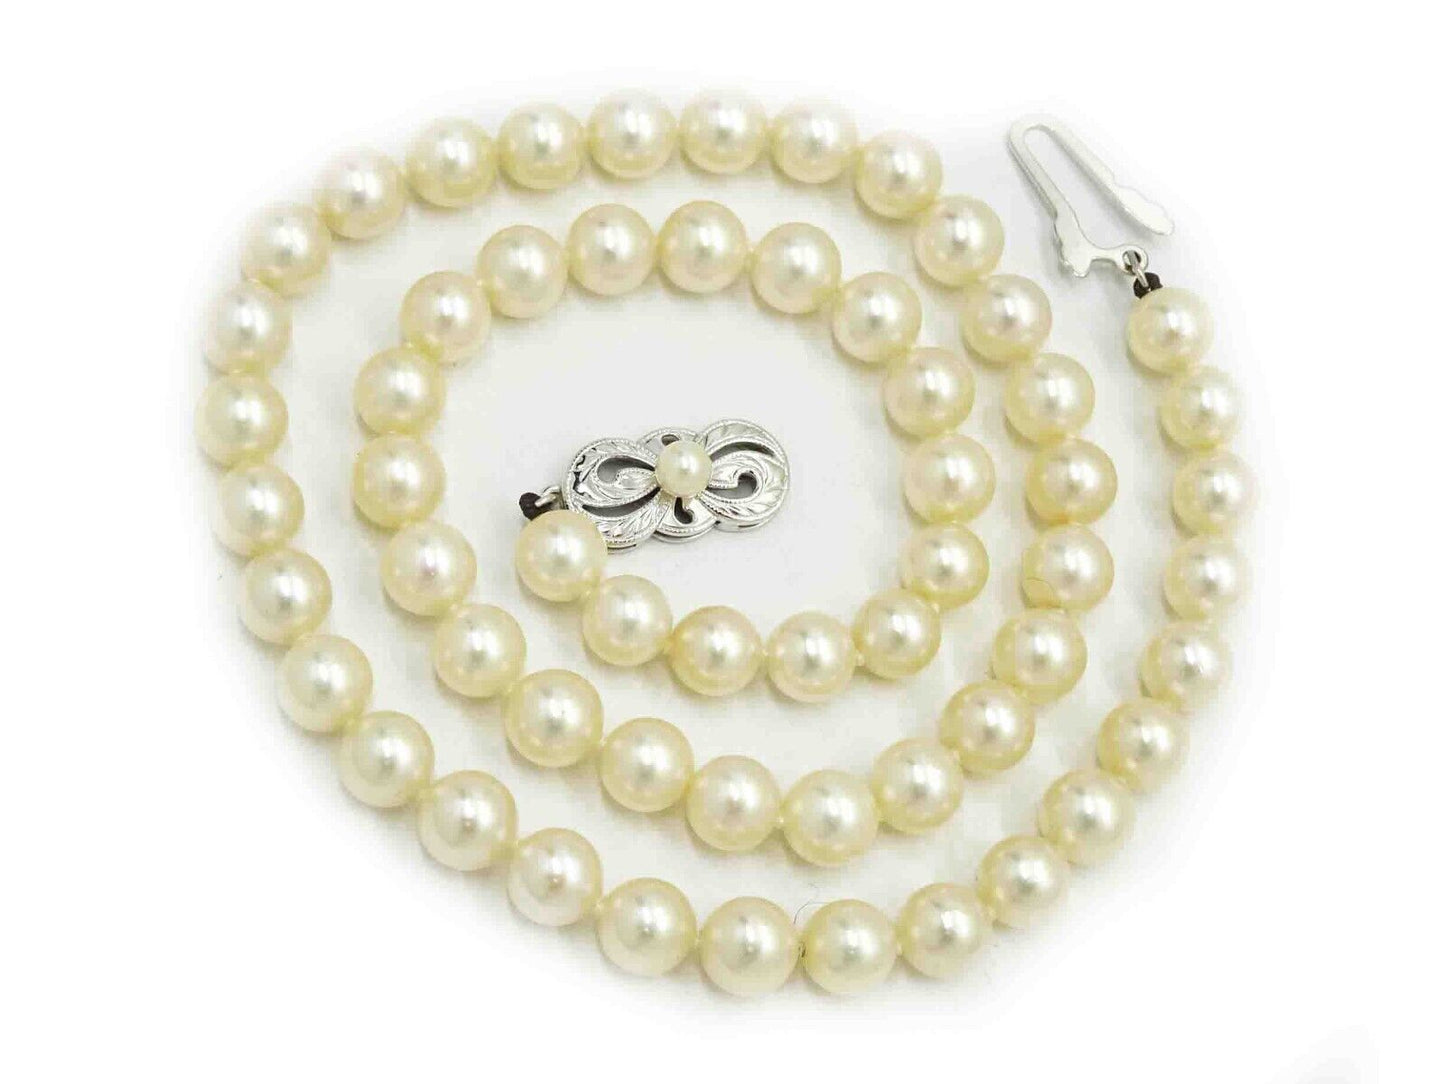 Mikimoto 6-6.5mm Akoya Cultured Pearl Bead Strand Necklace 18k White Gold 16"